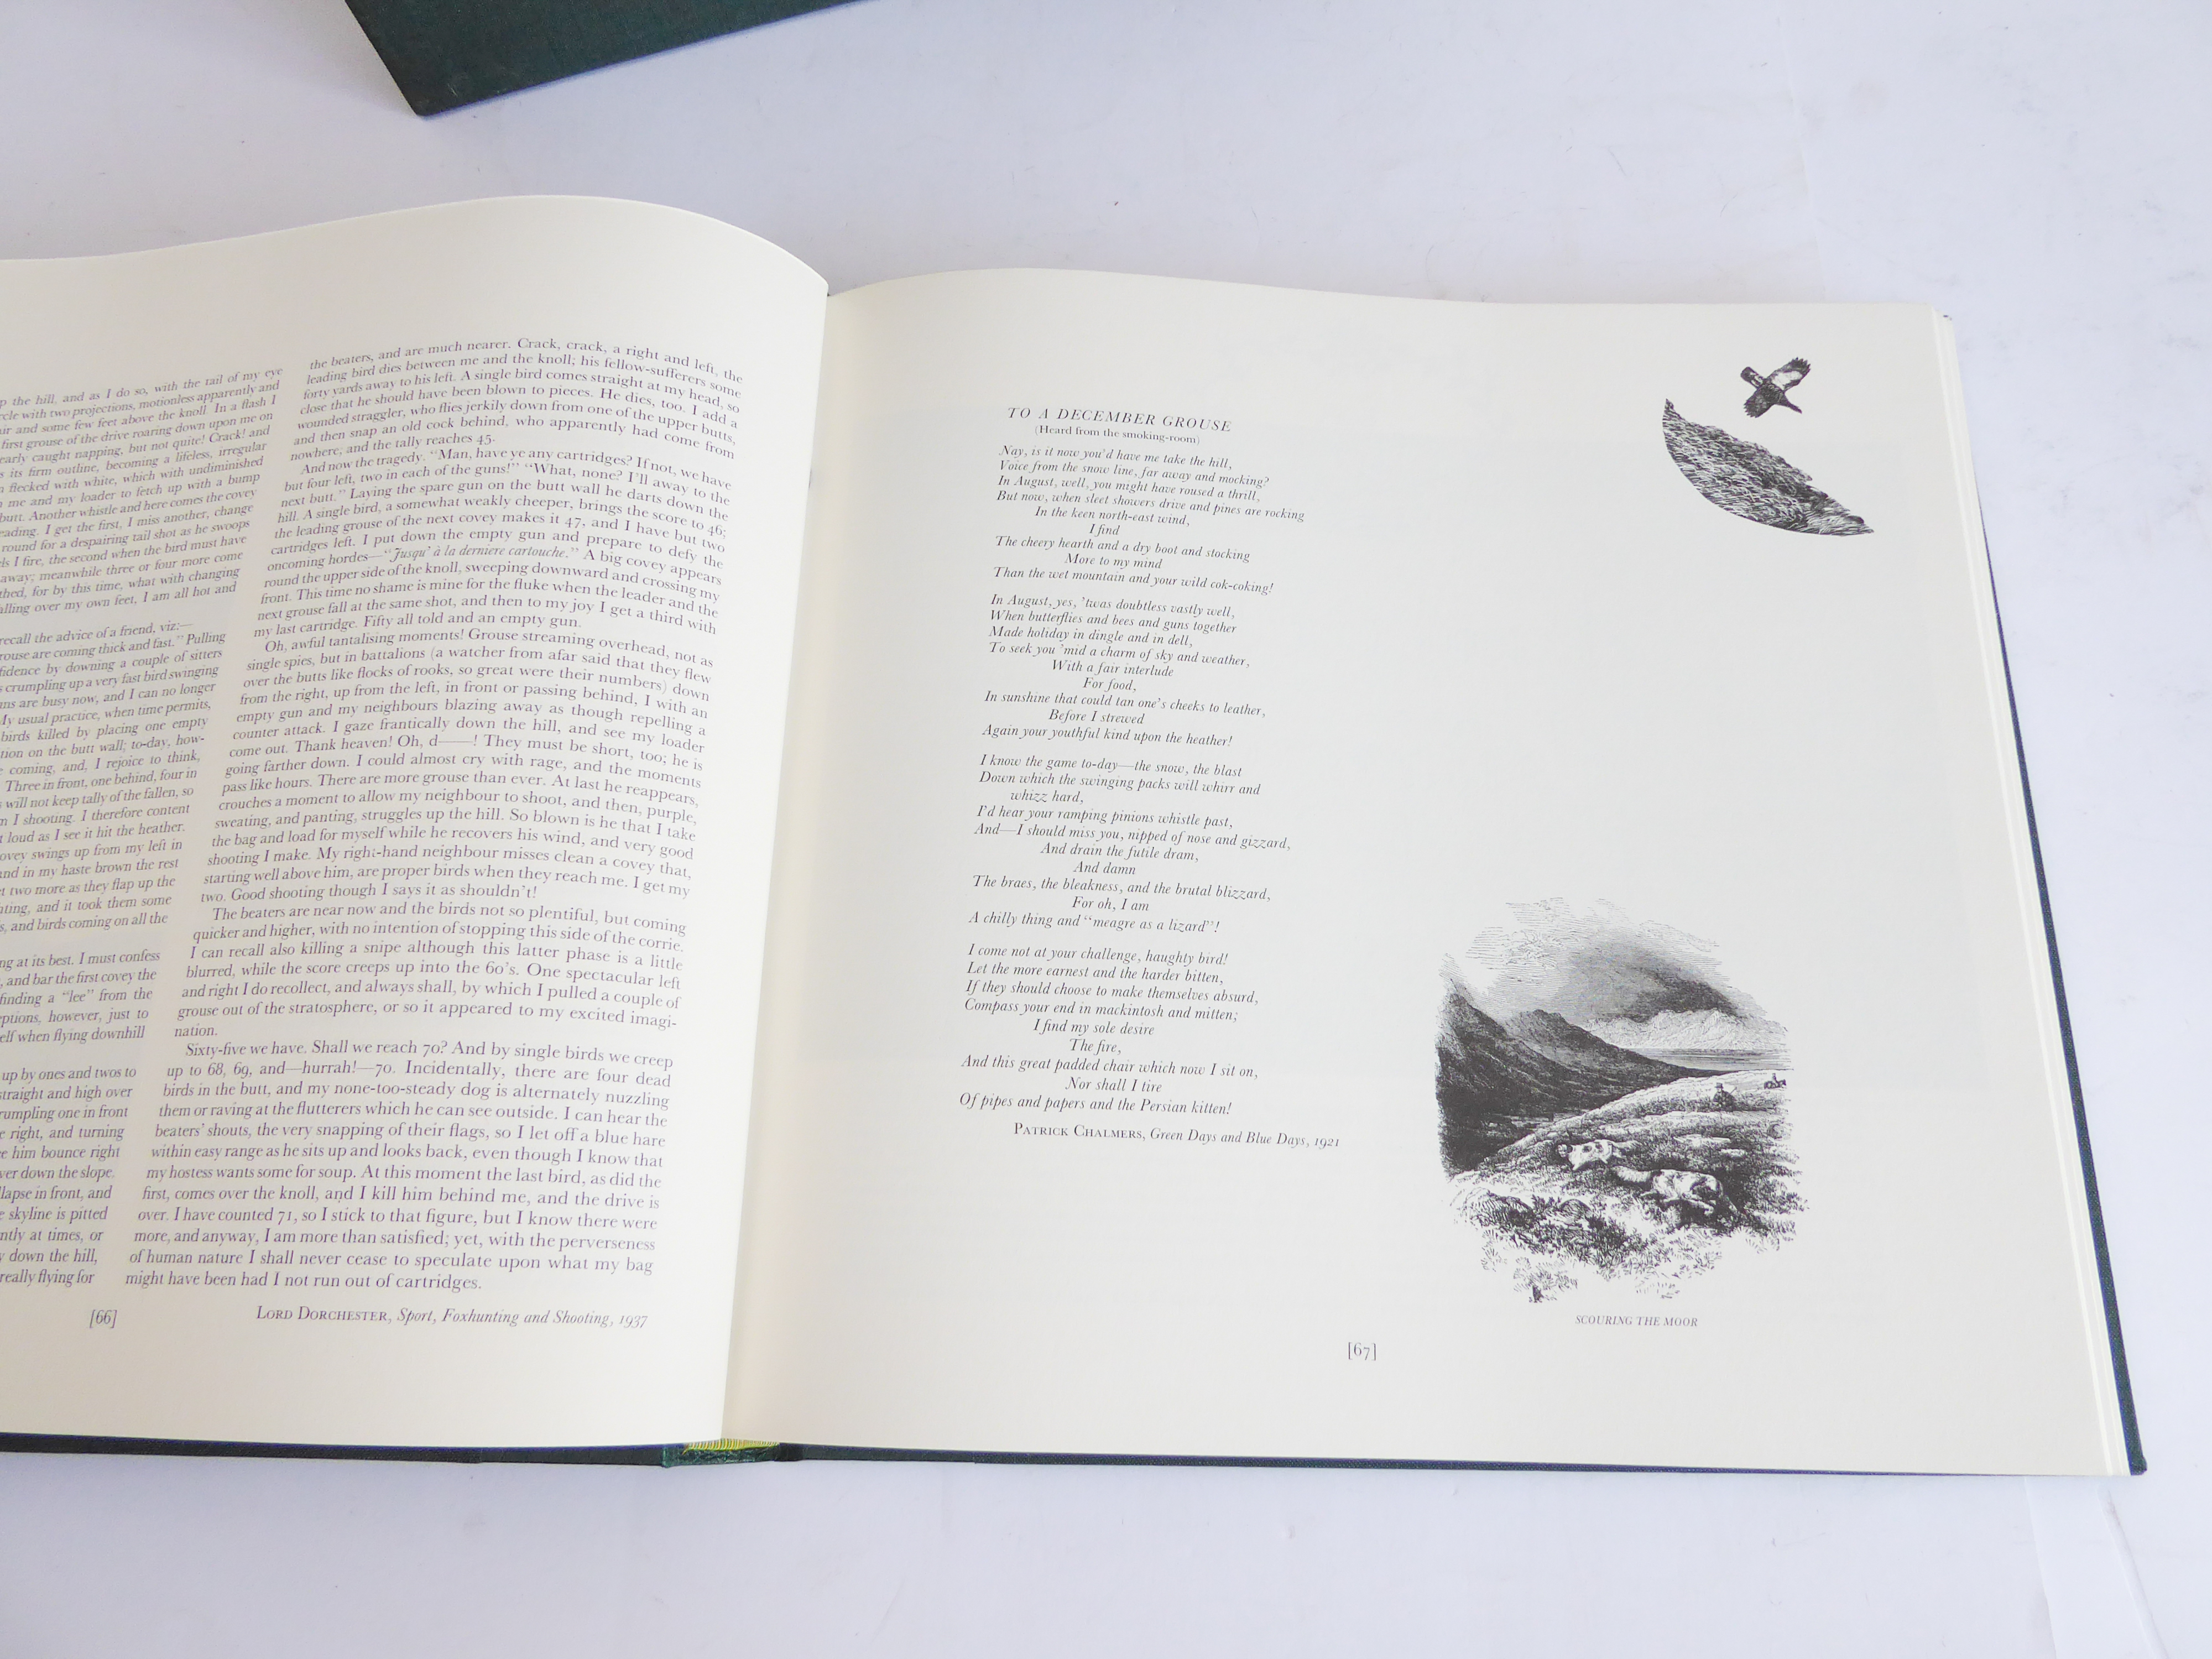 Four volumes on shooting and fishing: John Marchington - 'A Portrait of Shooting' (Antony Atha 1979, - Image 7 of 11